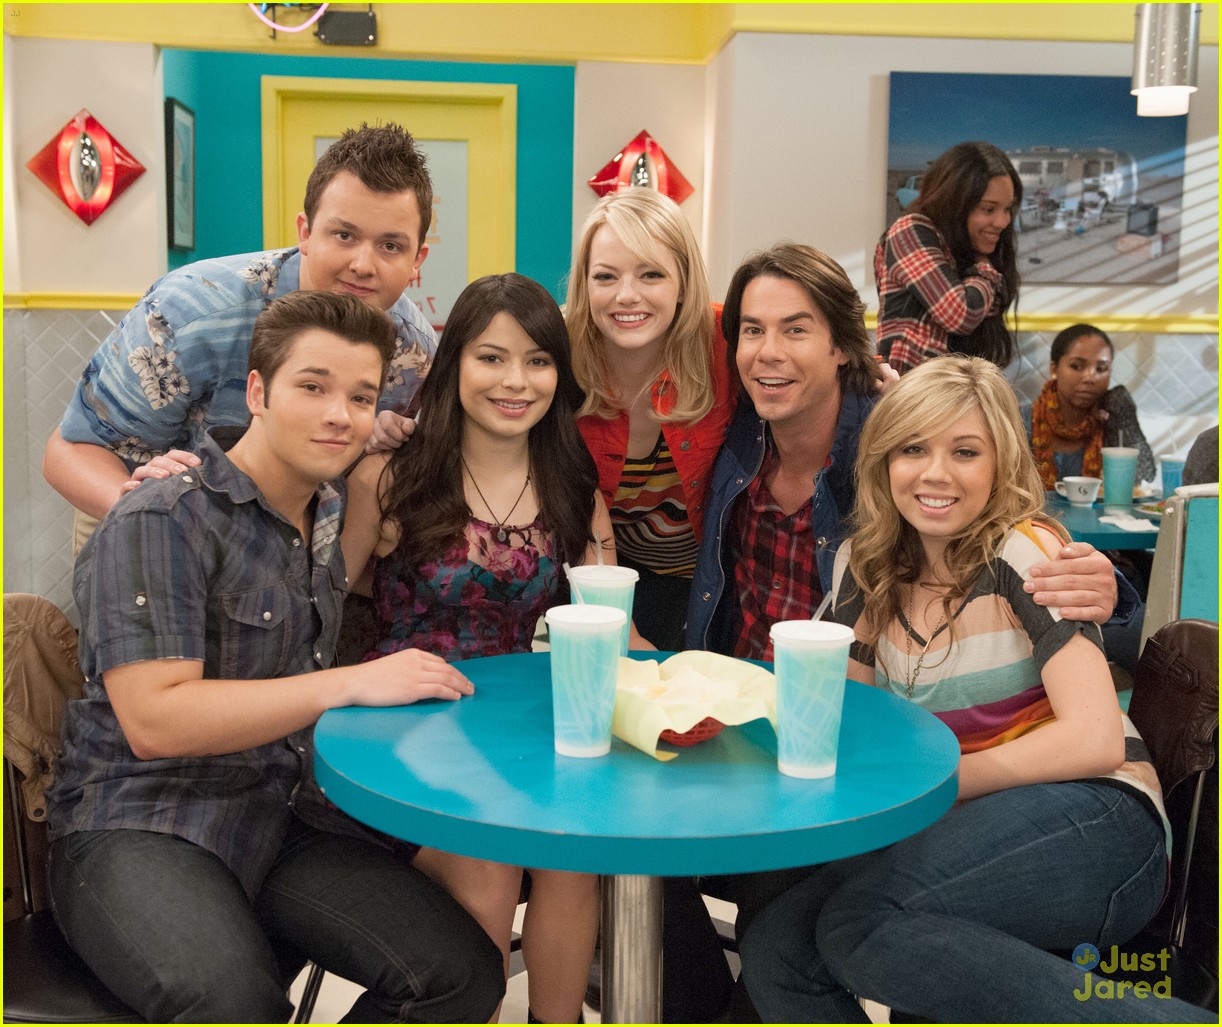 emma stone icarly first look 08